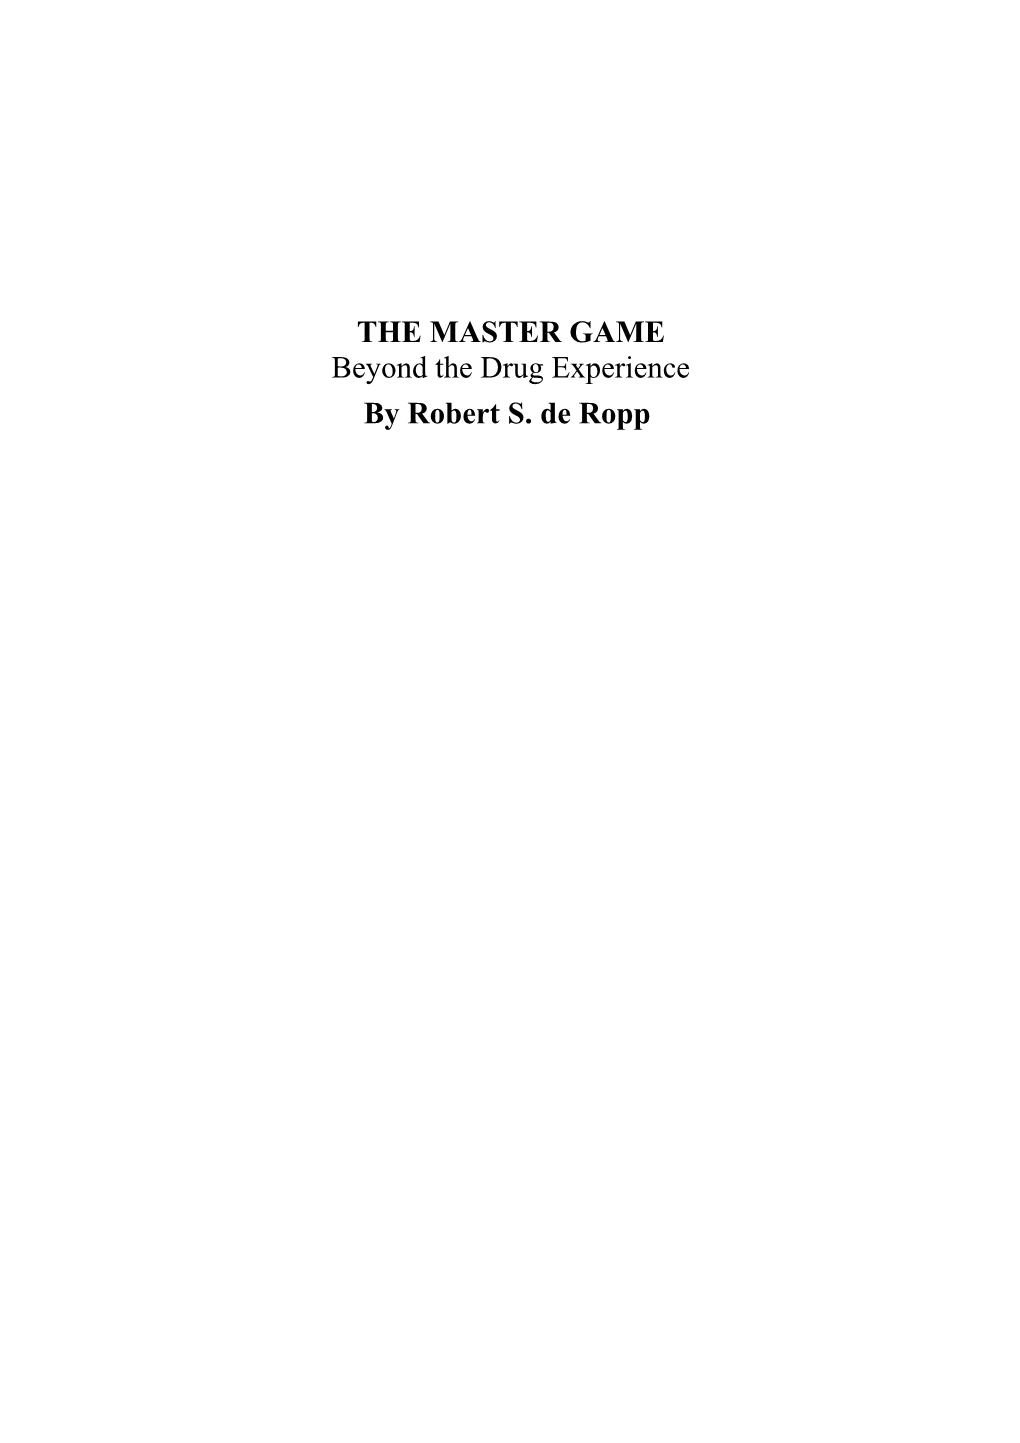 THE MASTER GAME Beyond the Drug Experience by Robert S